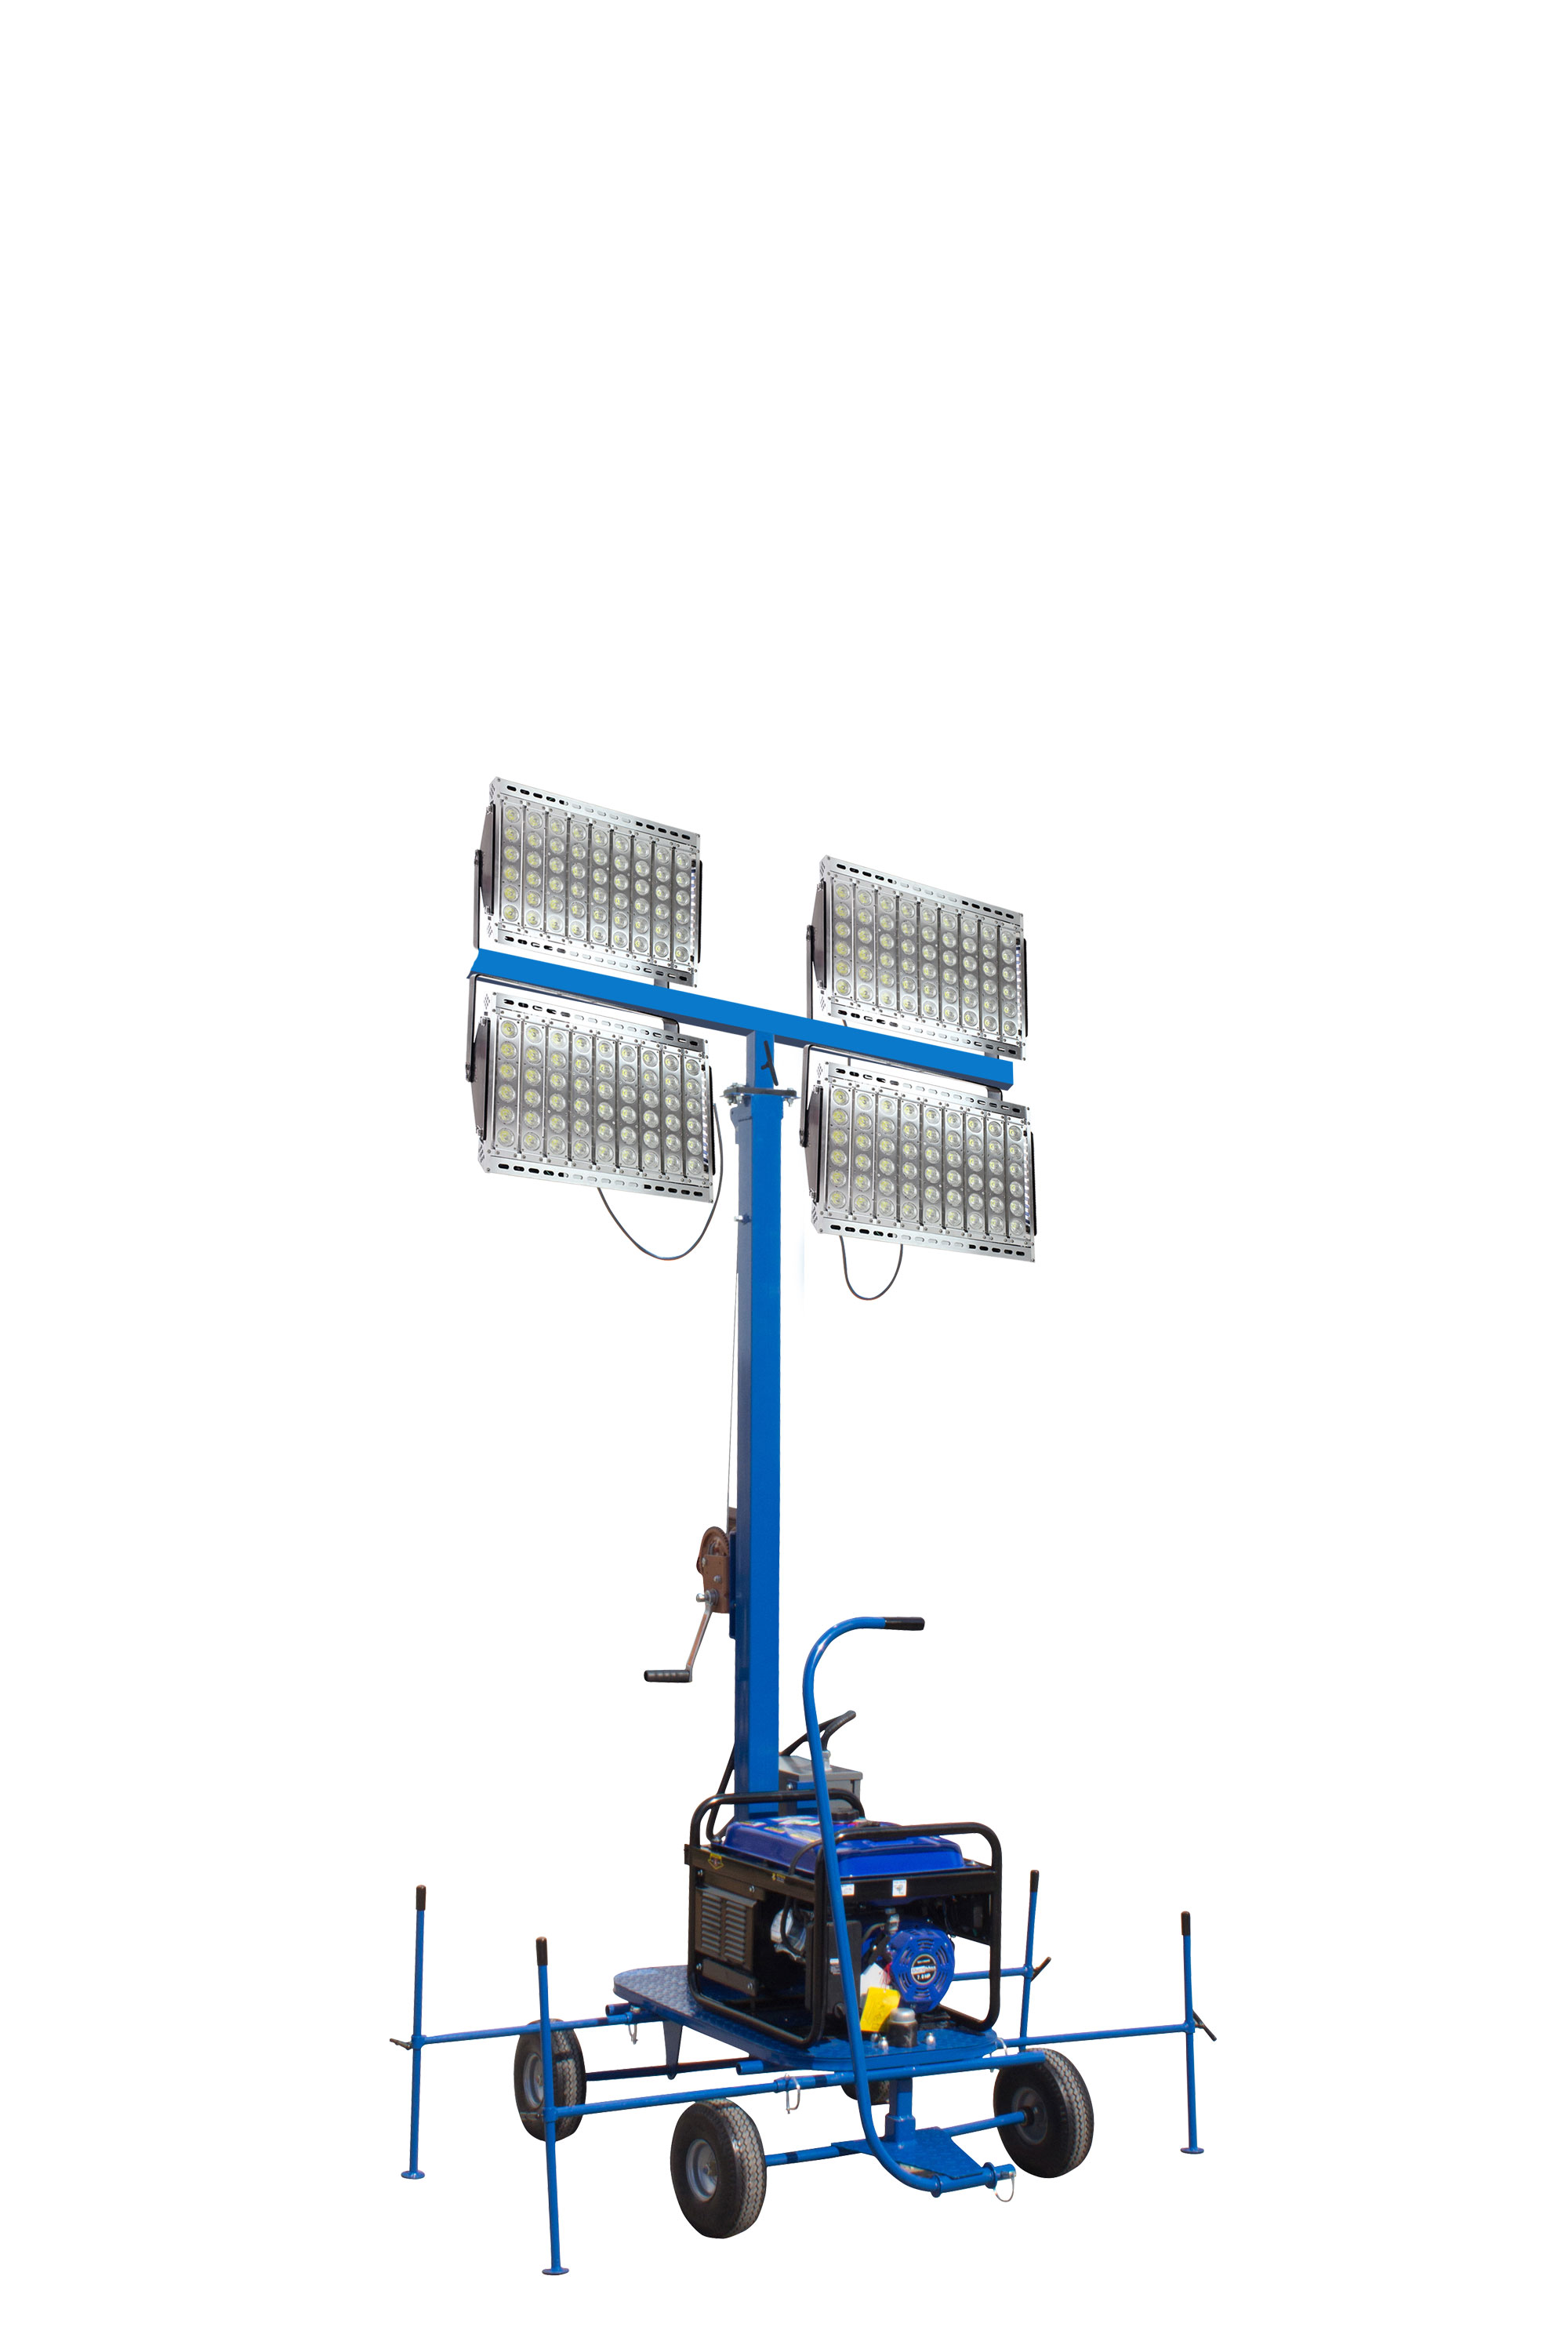 Mini LED Light Tower Equipped with Four 400 Watt Fixtures